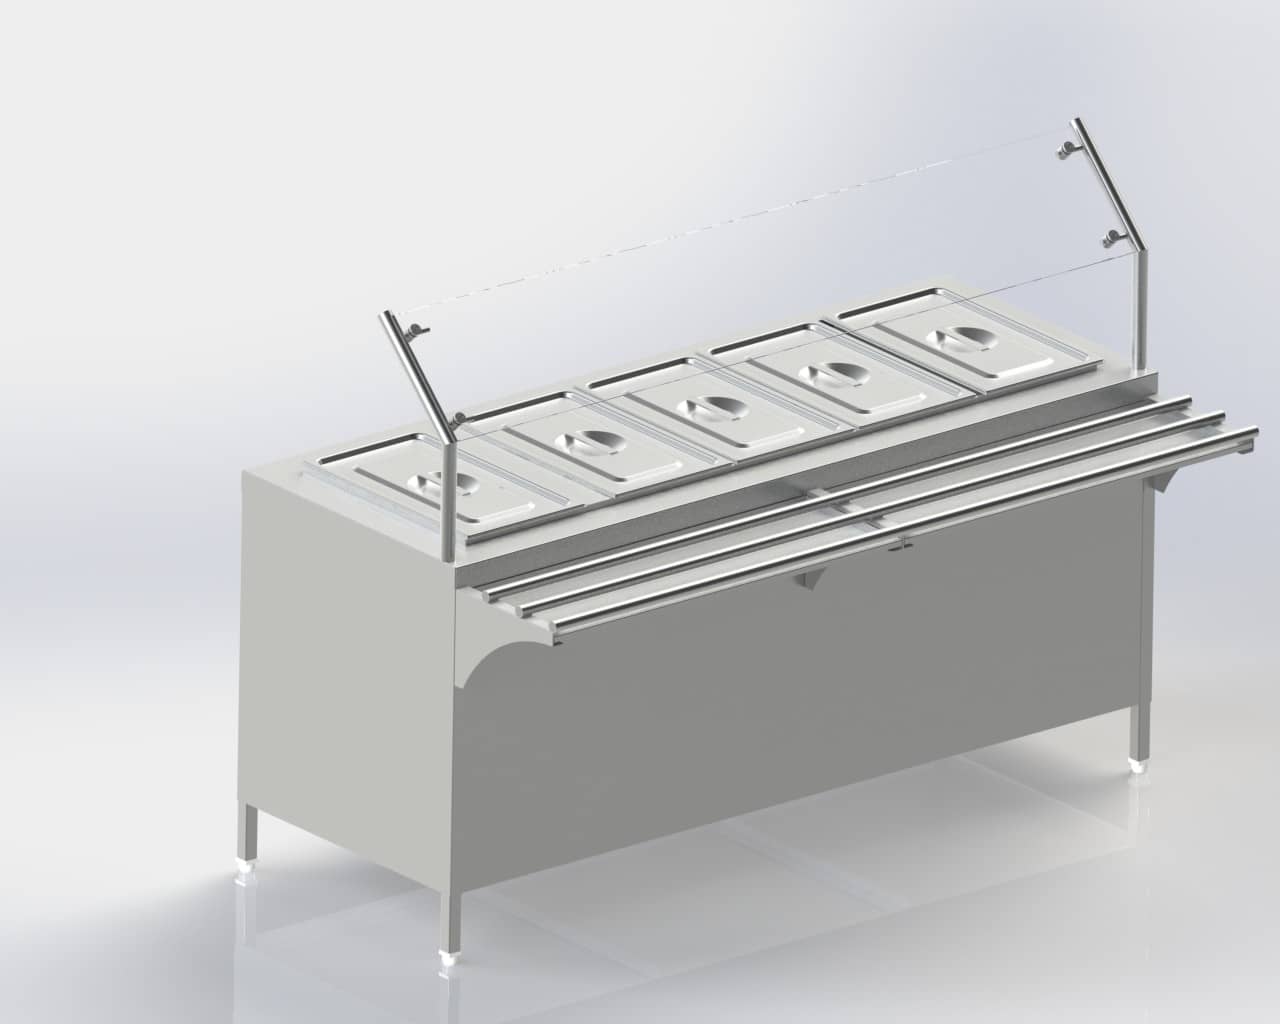 Bain Marie for keeping food hot,cold or at room temperature